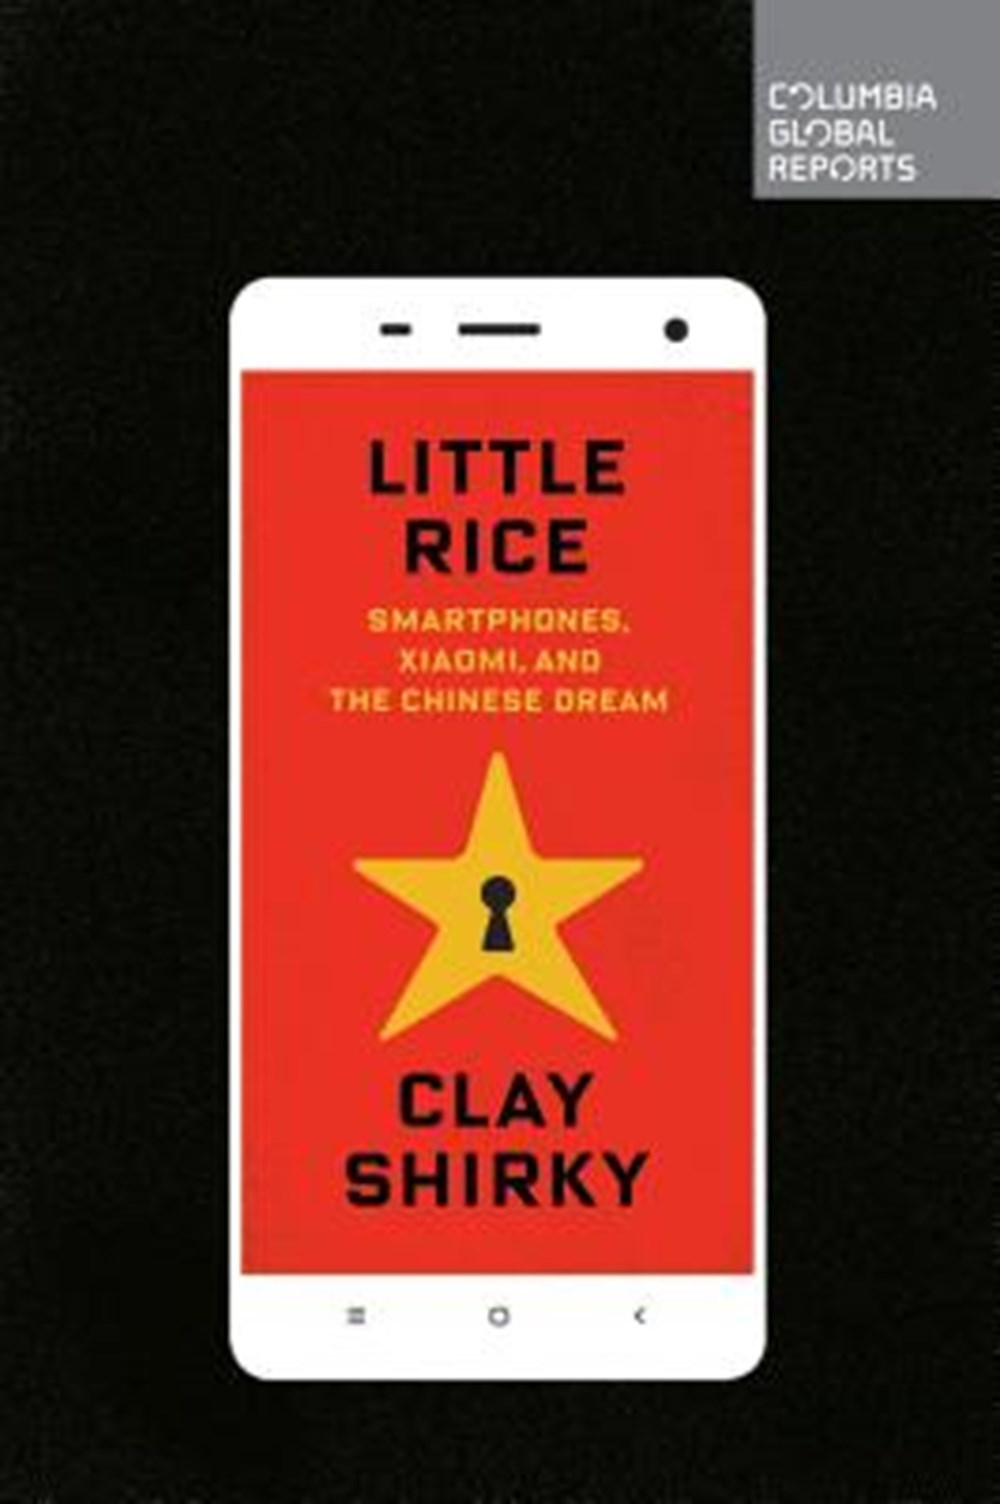 Little Rice Smartphones, Xiaomi, and the Chinese Dream